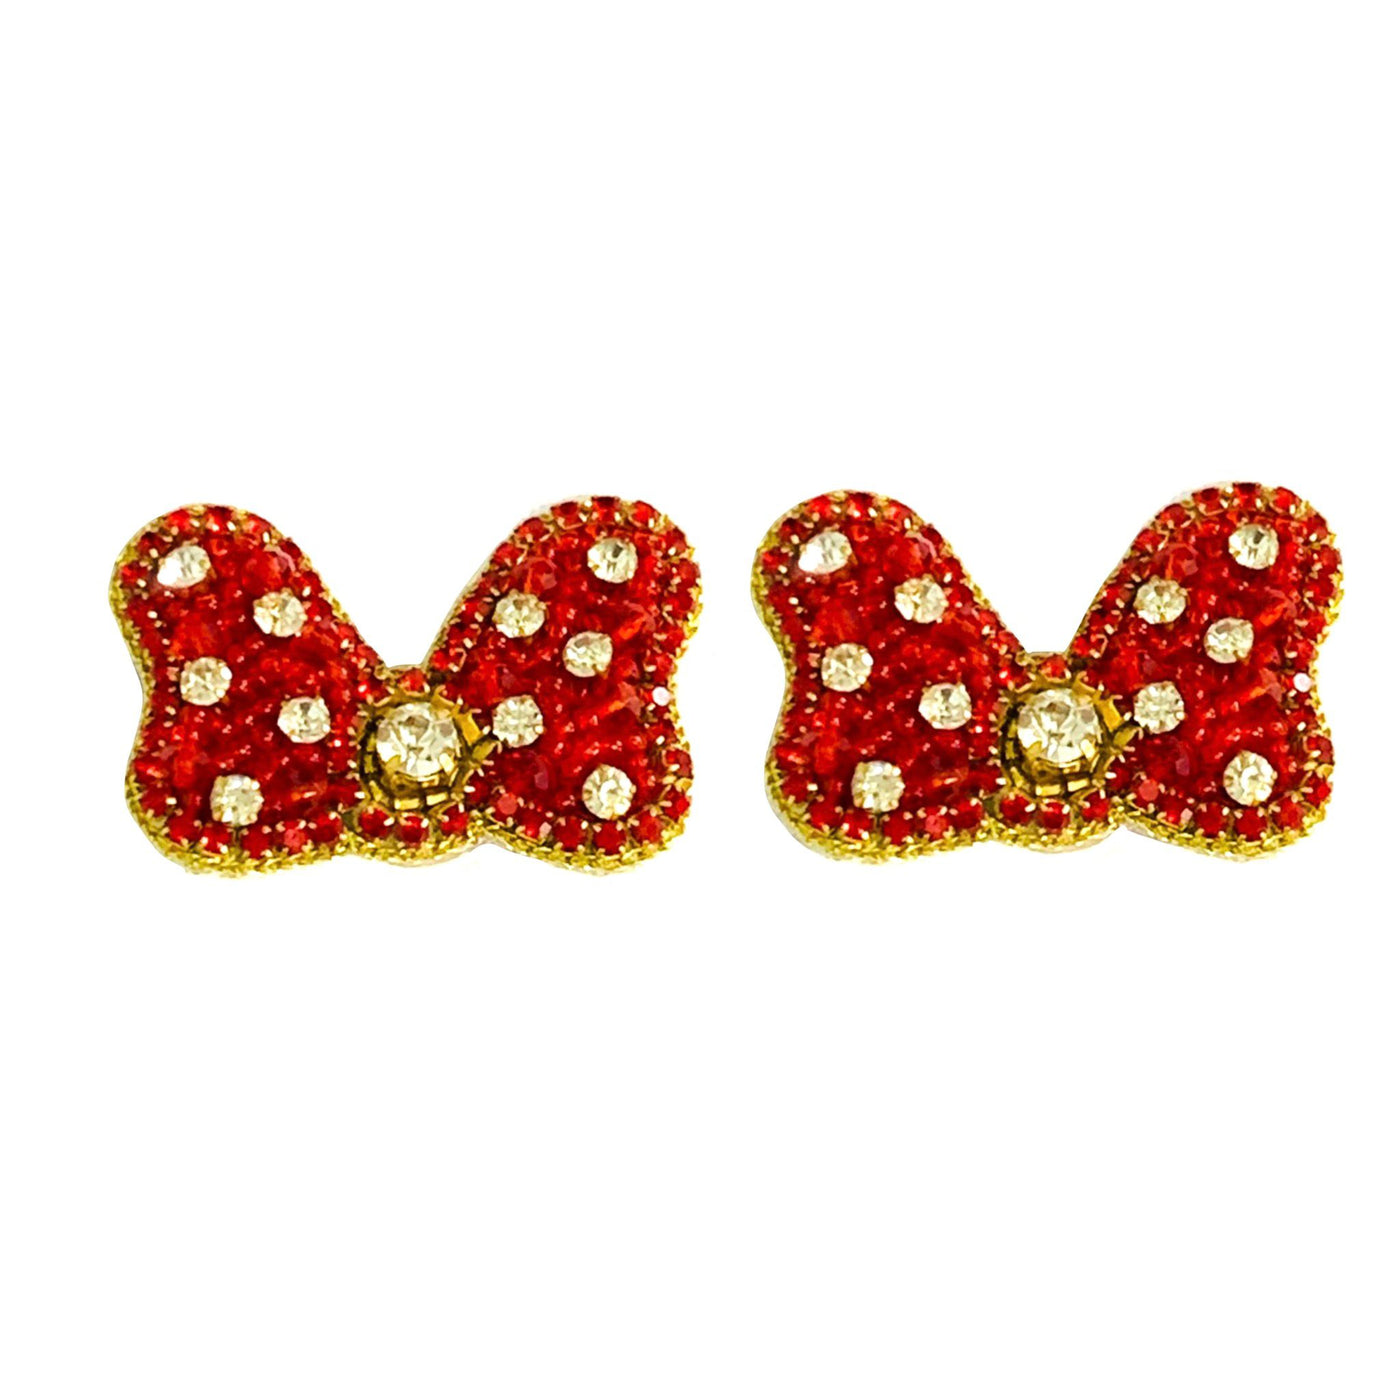 Bow with Rhinestone Stud Earrings - Red